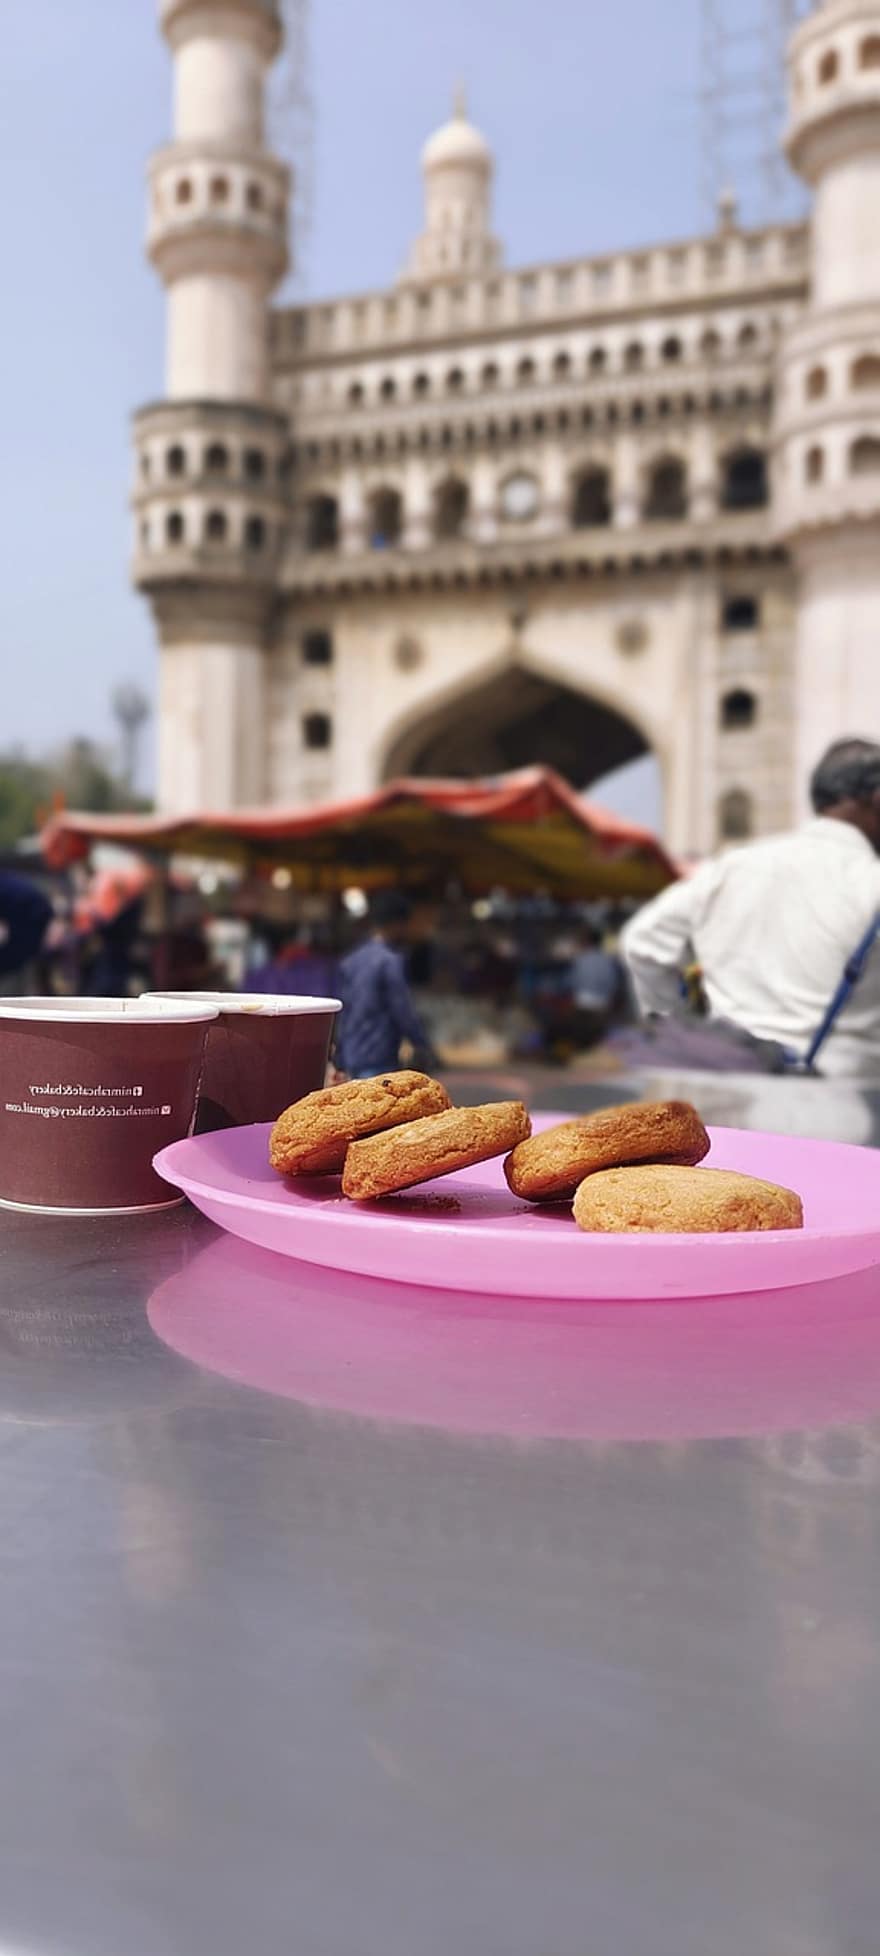 Tea, Old City, Street, Unesco World Heritage Site, Nizam, History, Historical Place, Osmania Biscuit, Crowded Street, Bangles, food